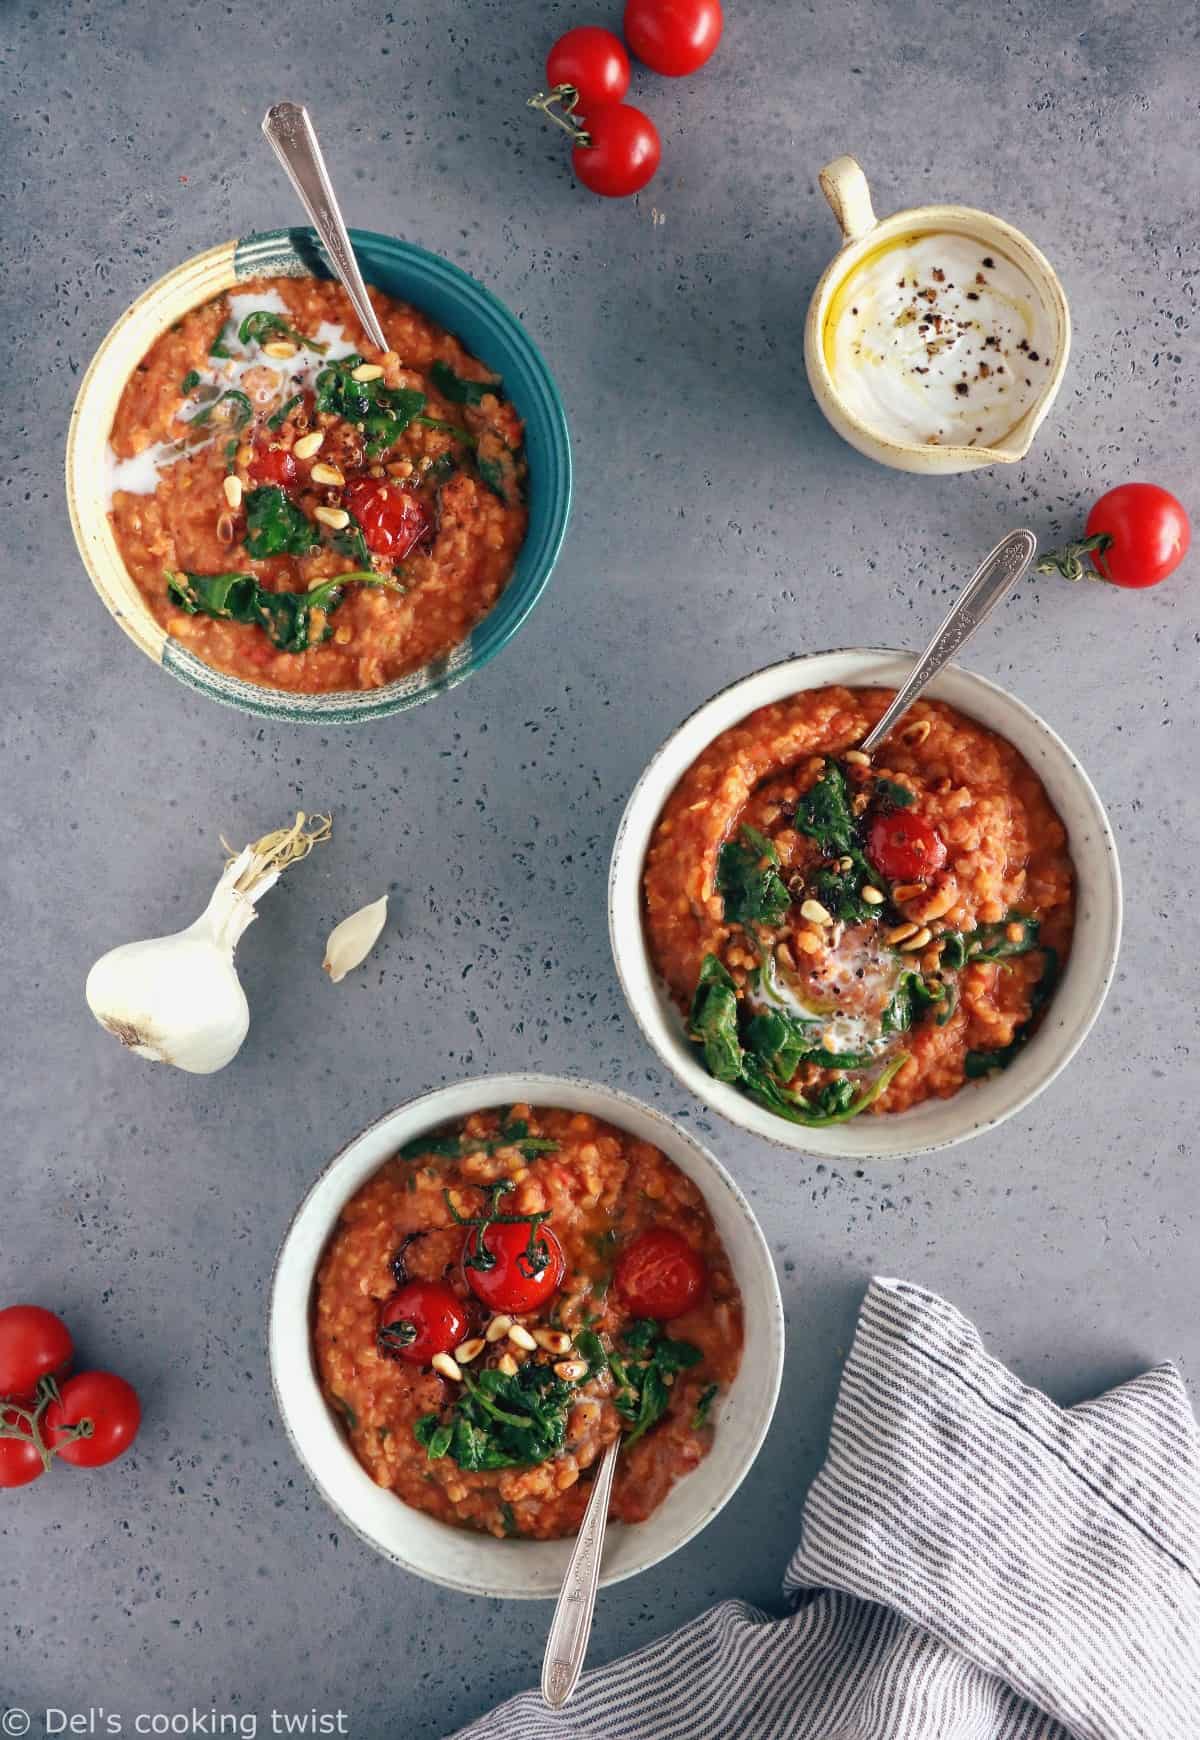 Easy tomato red lentil stew with spinach is my go-to dal recipe for cozy evenings. It's warm, full of hearty flavors and naturally healthy, vegan and gluten-free. I'm confident it will become your new favorite too.